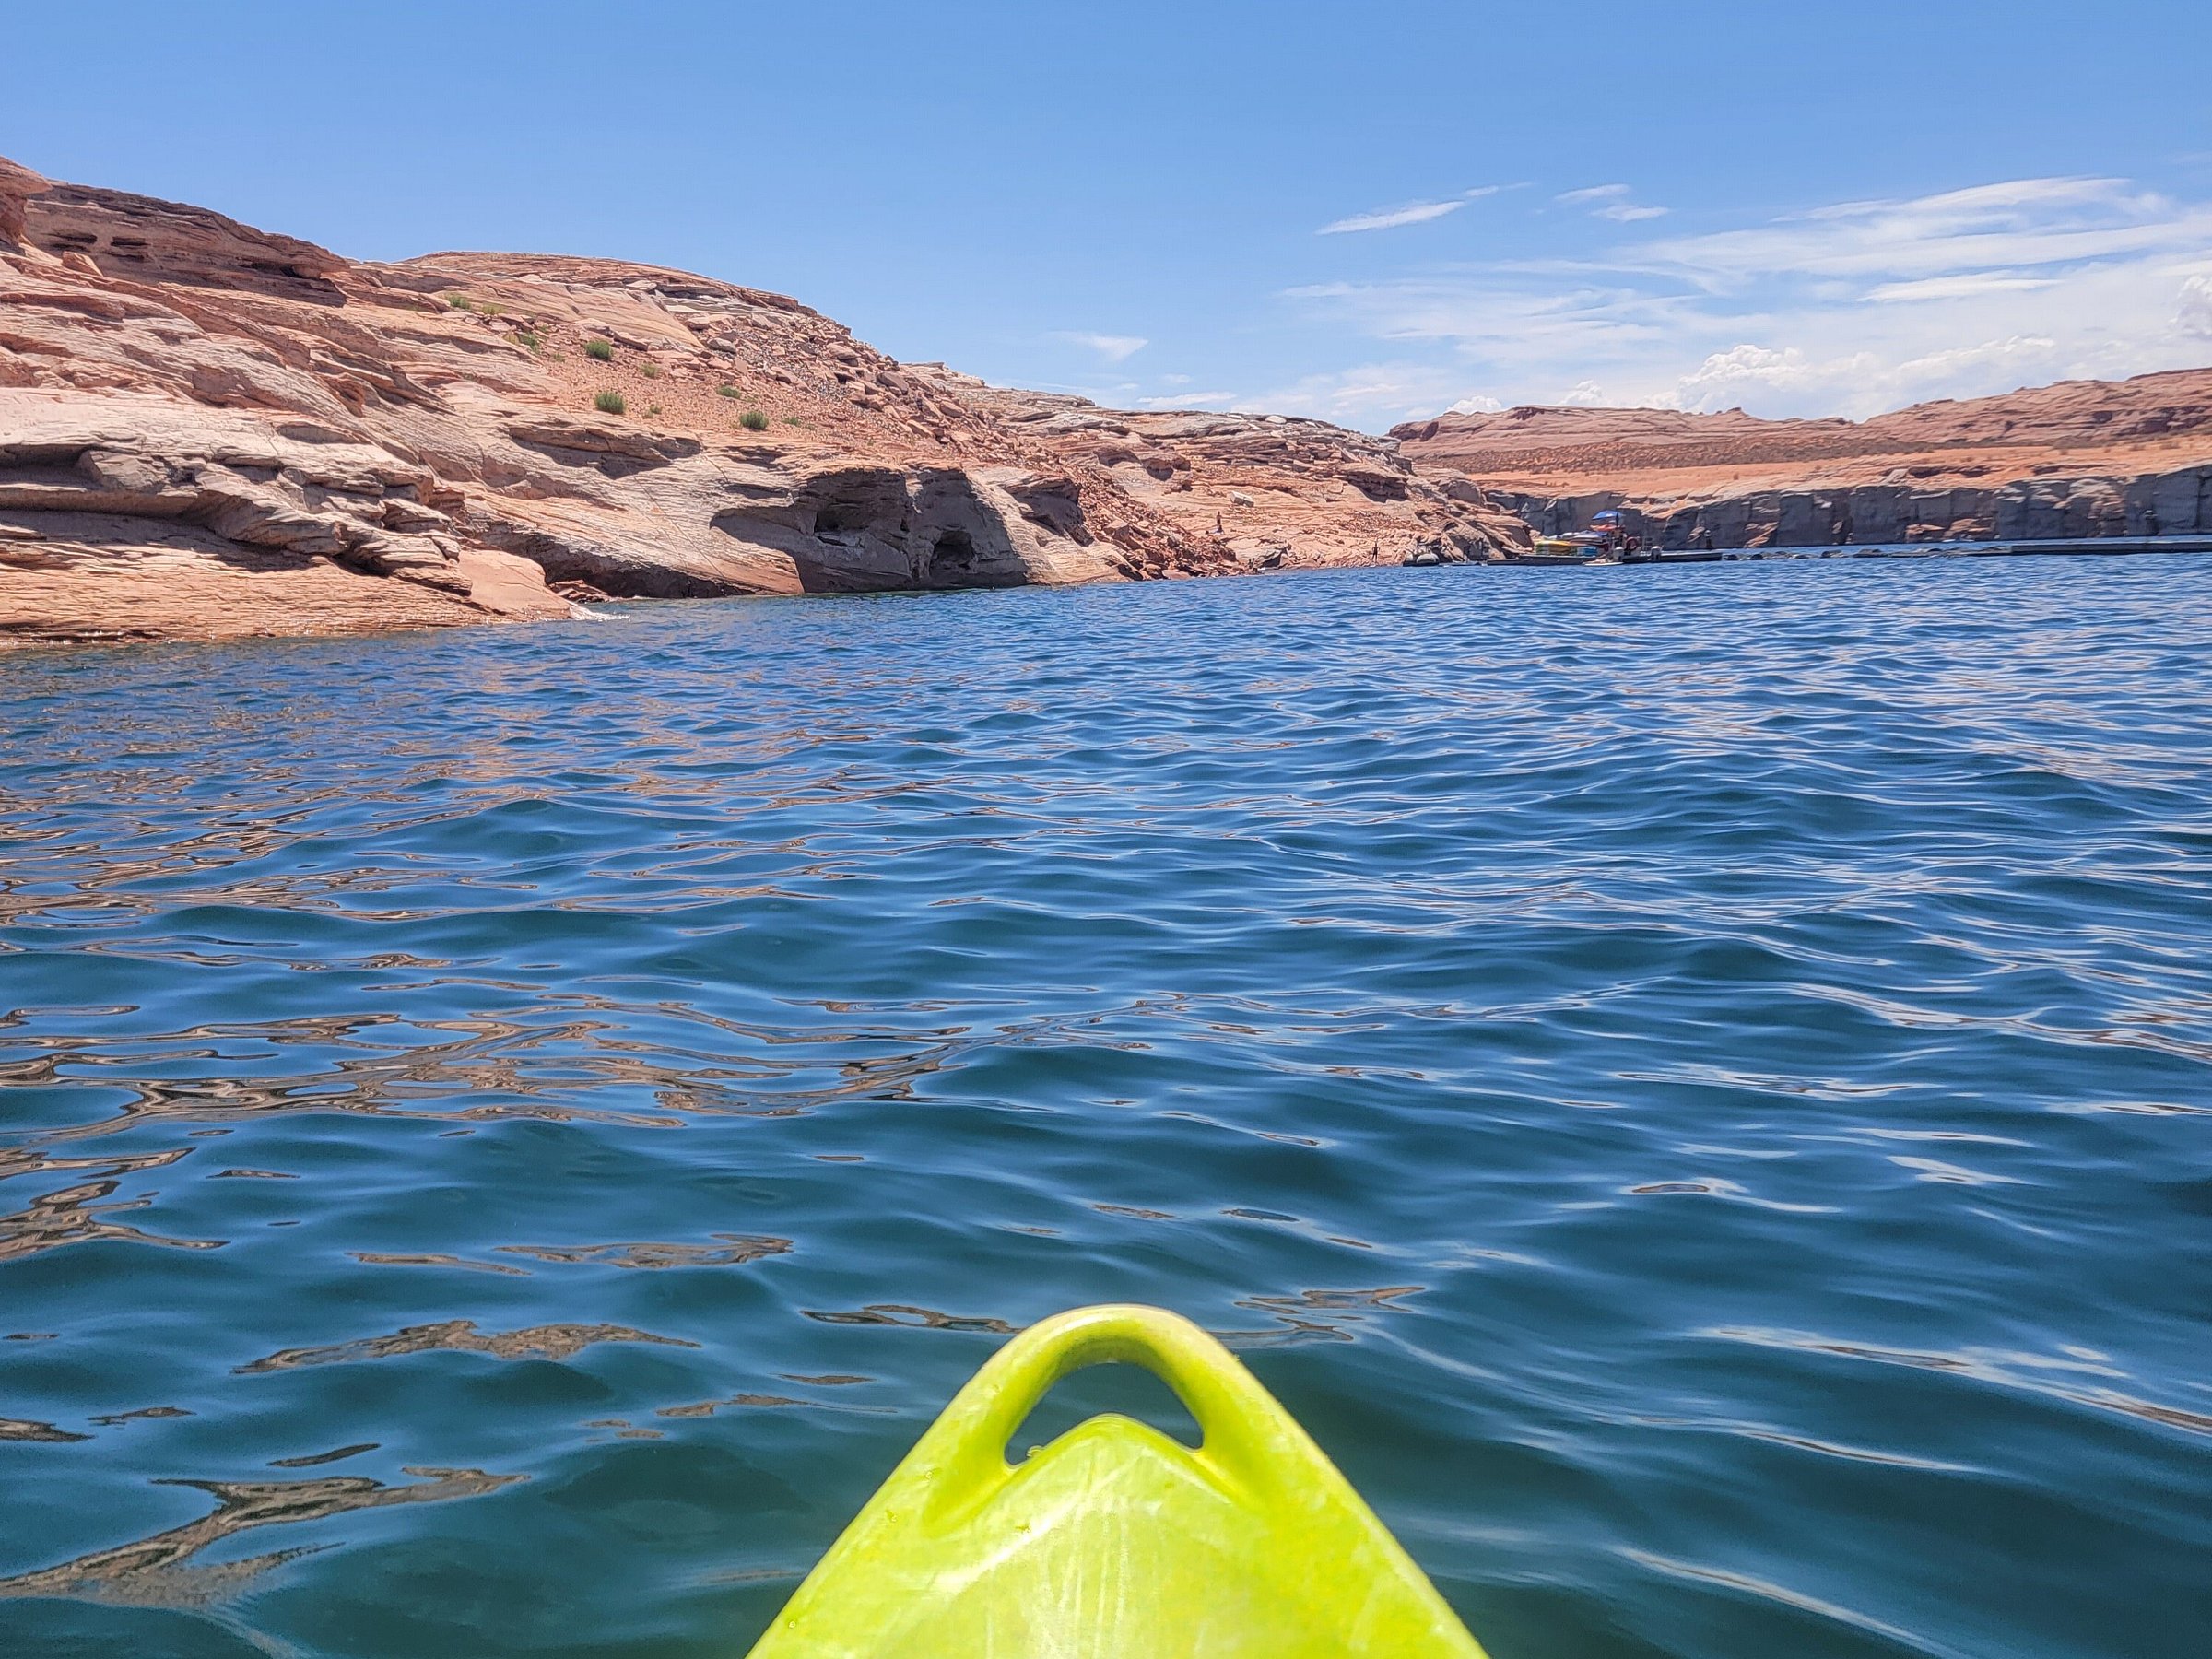 kayak lake powell rentals and day tours